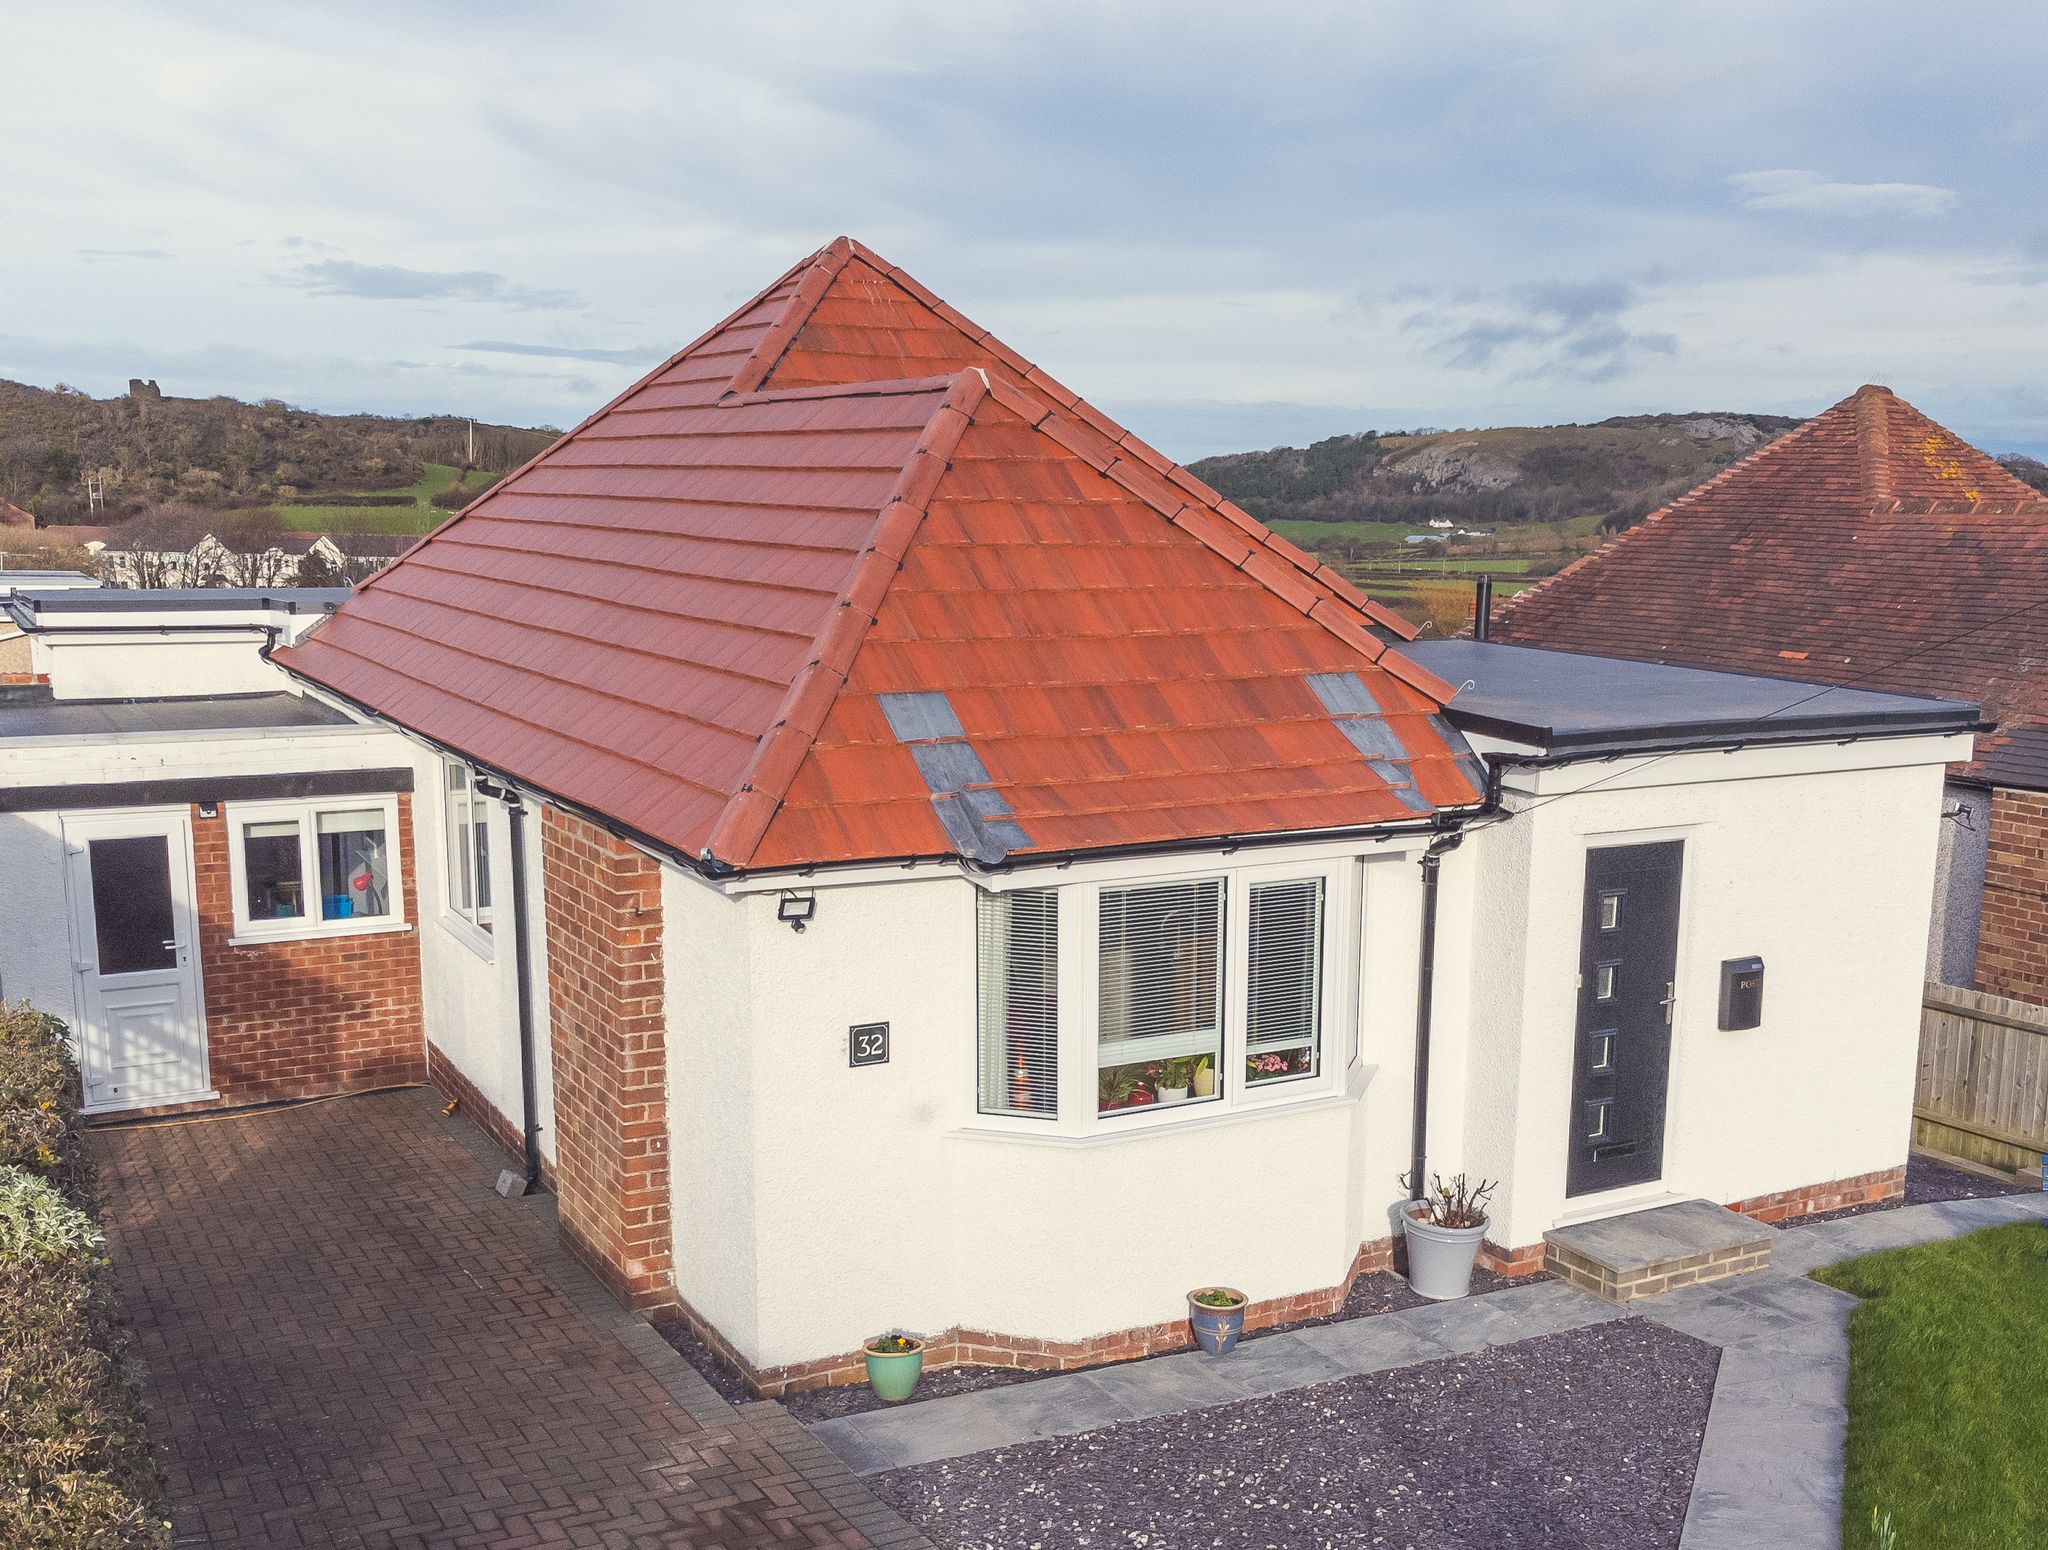 Tile Roof Contractors Tan-y-coed, LL55 - DD Roofing